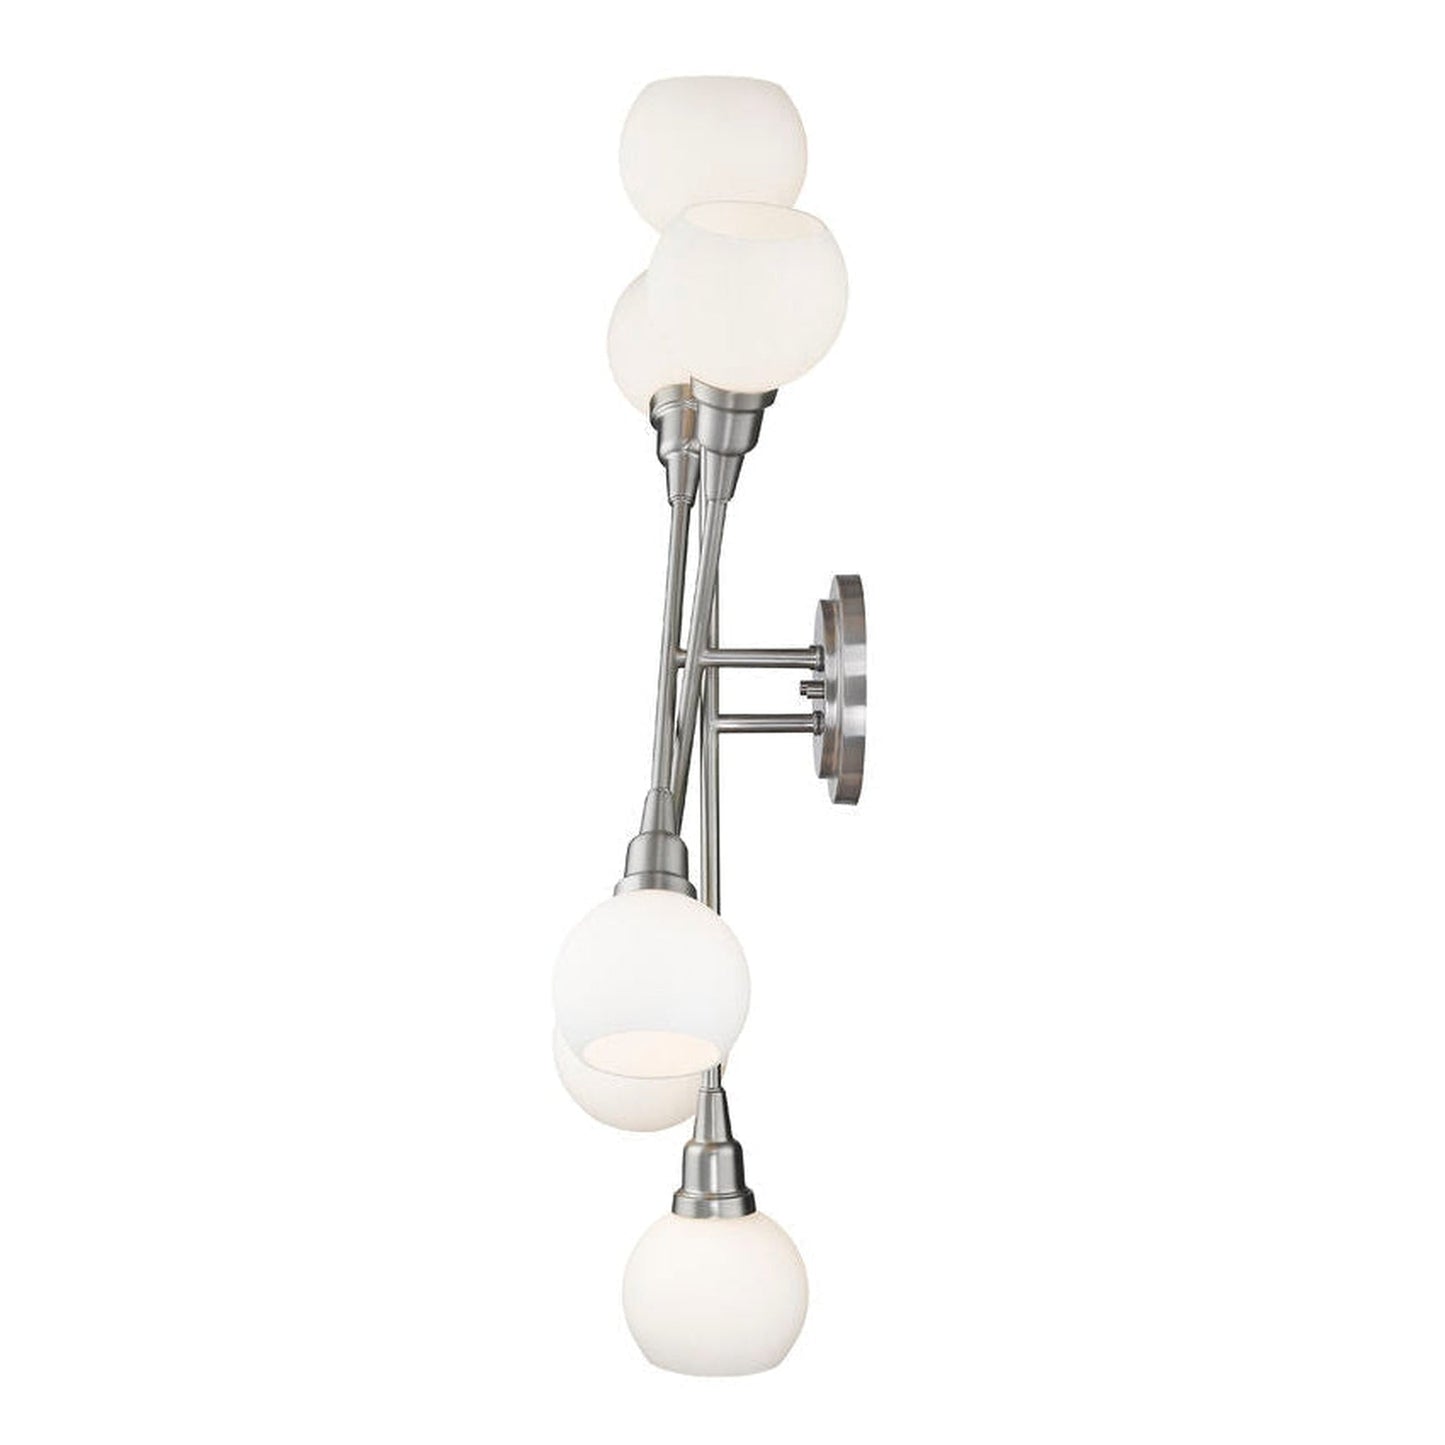 Z-Lite Tian 15" 6-Light Brushed Nickel Wall Sconce With Matte Opal Glass Shade